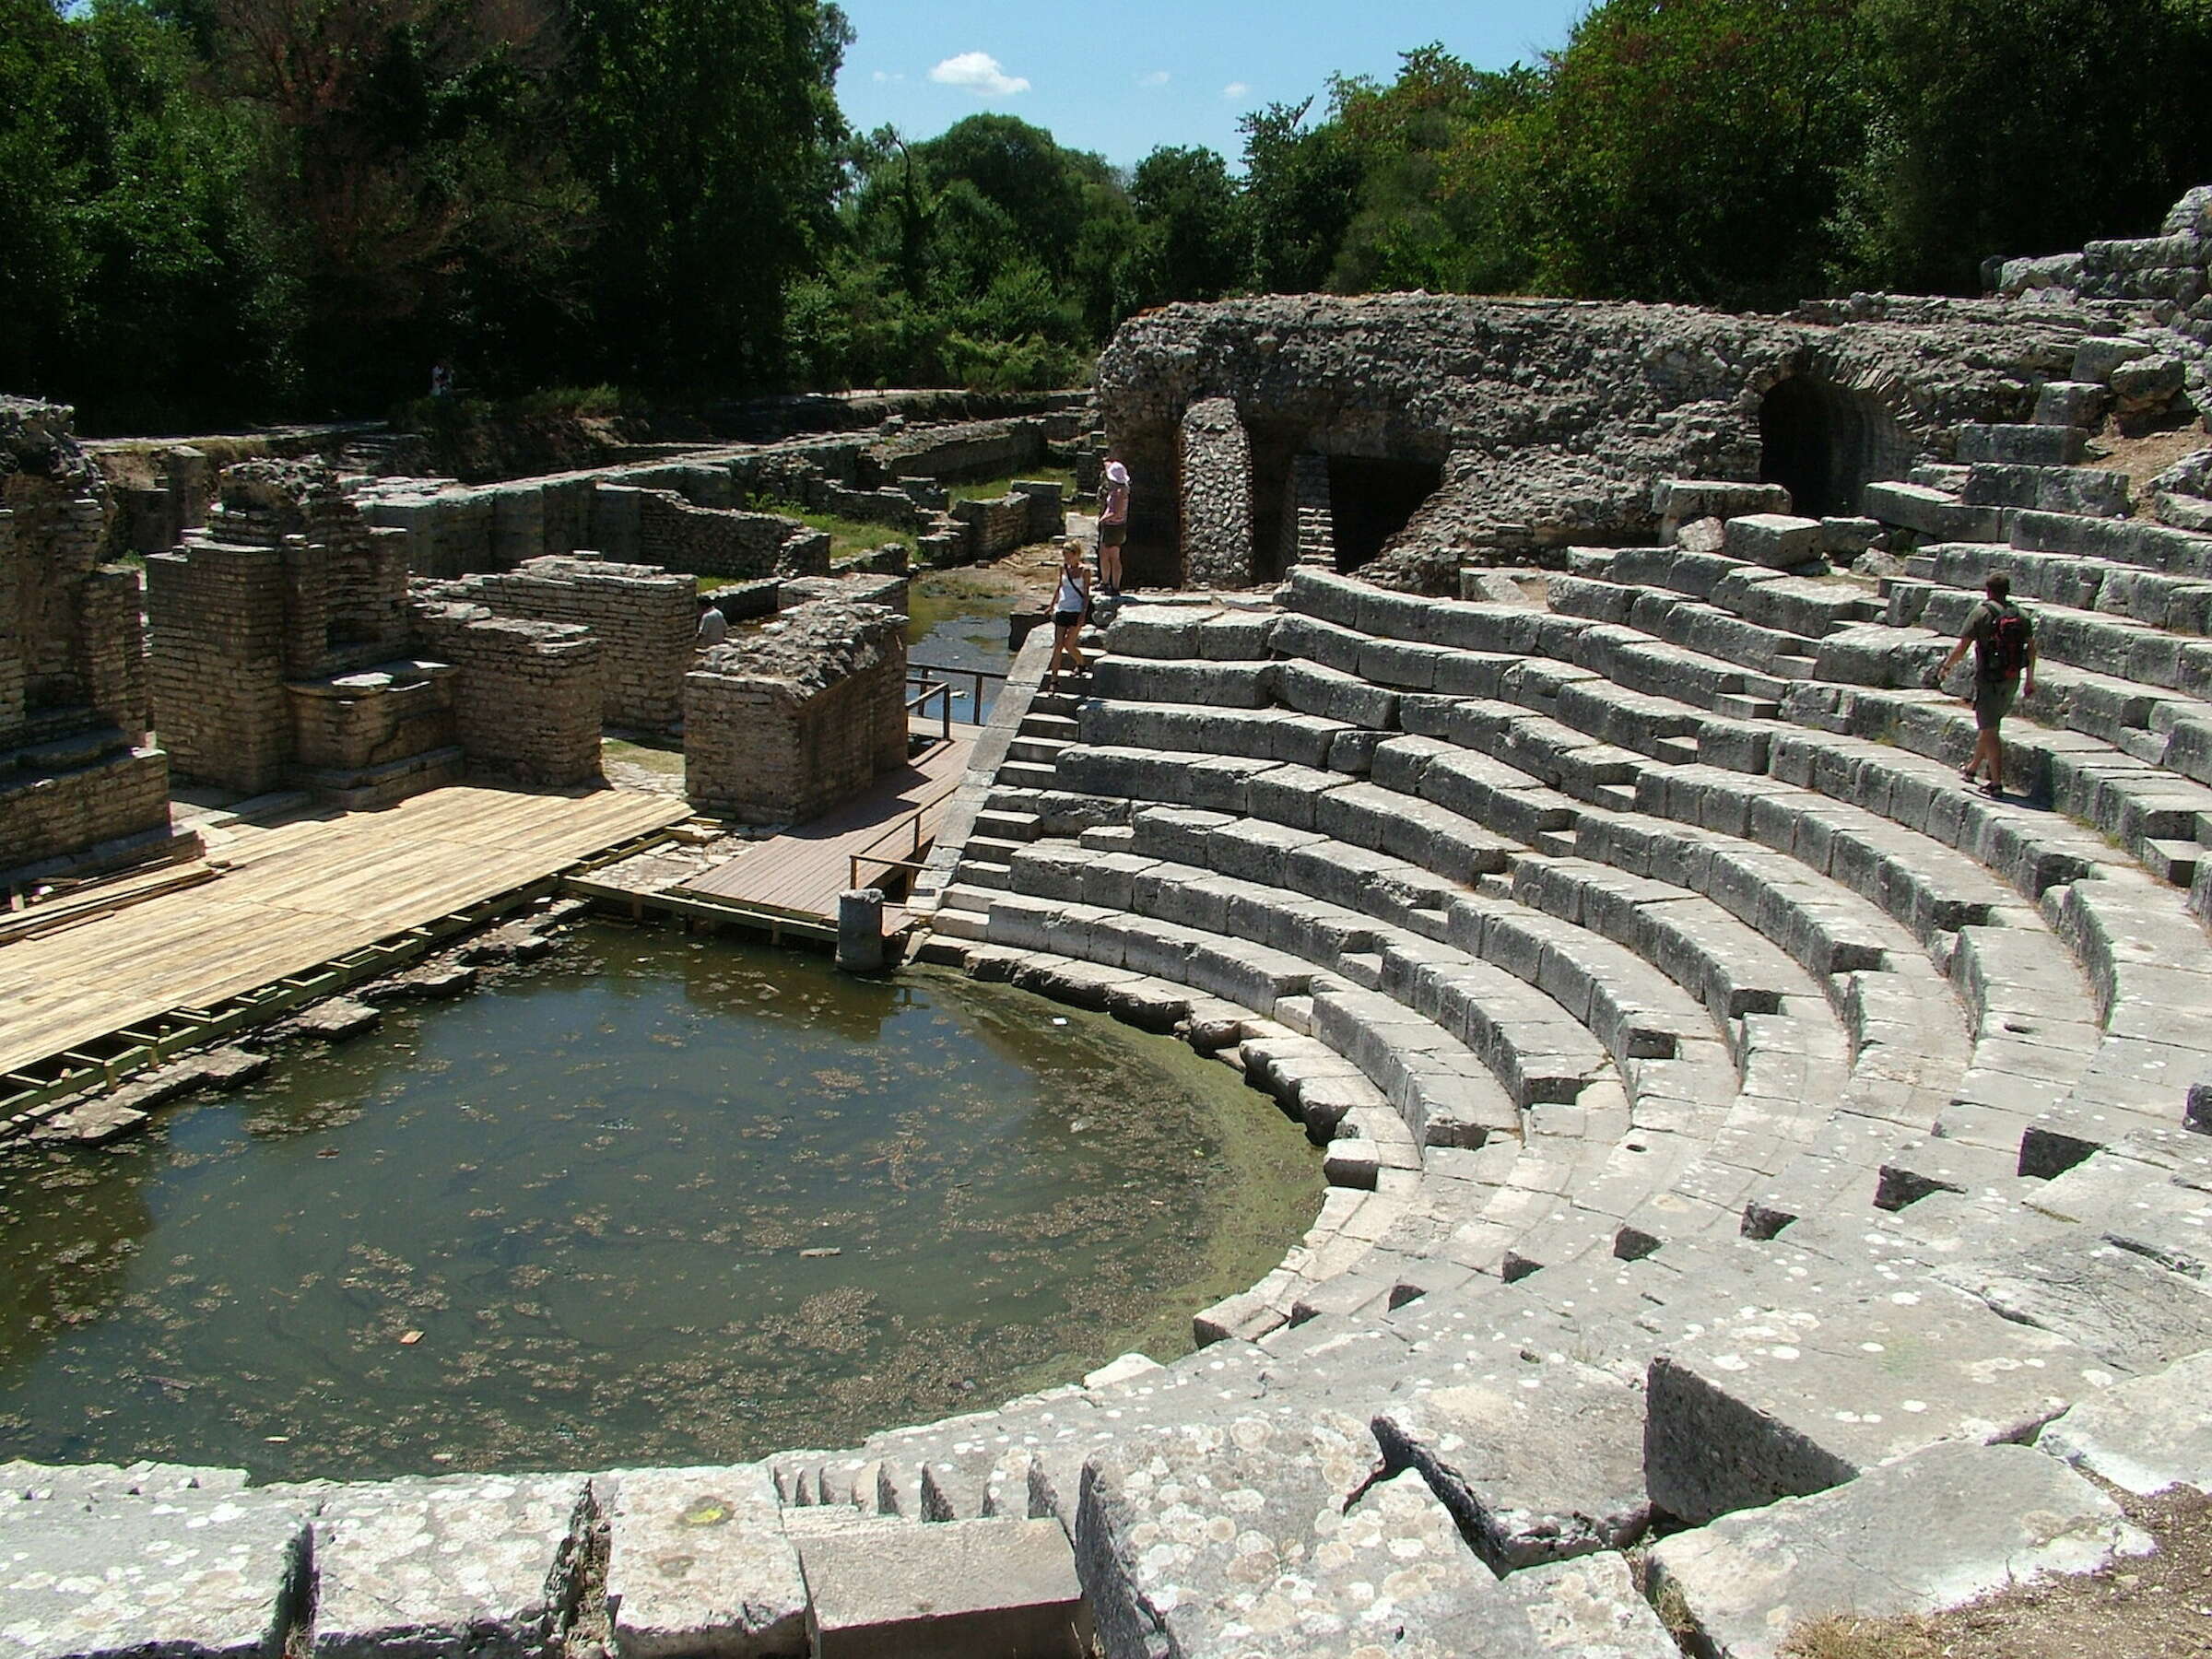 Butrint ancient theater from 3rd century BC